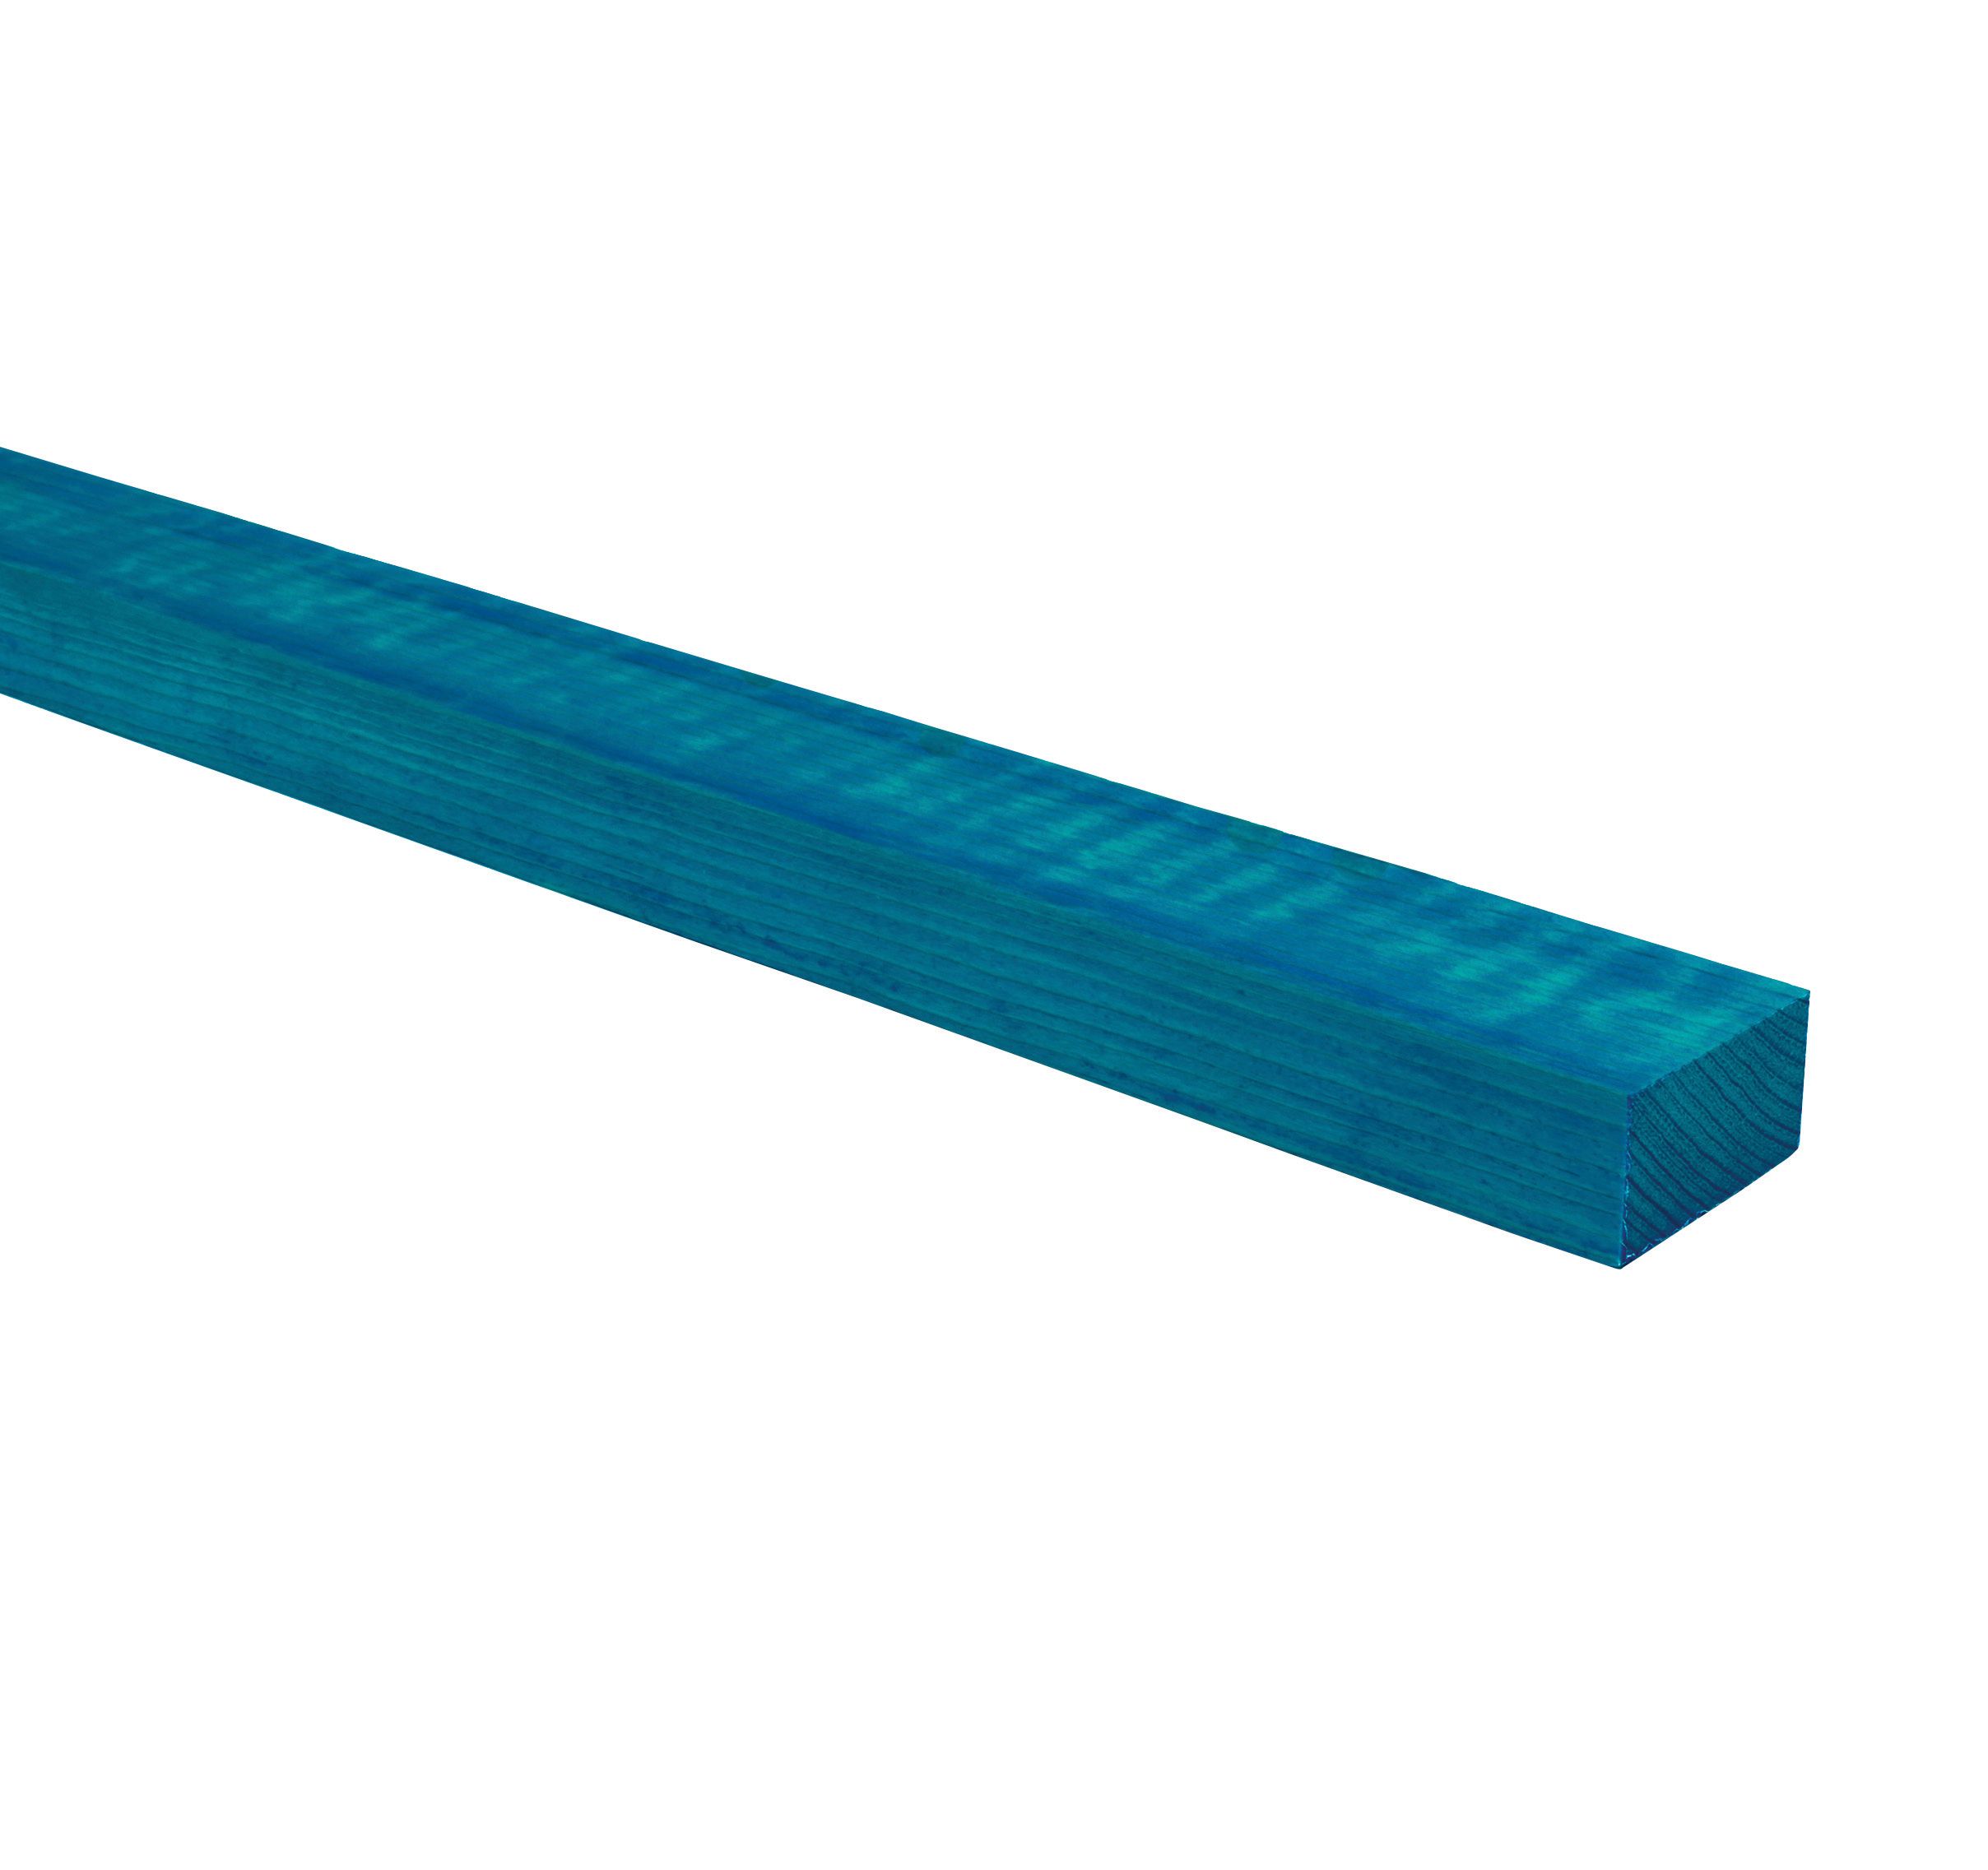 Image of Wickes Treated Timber Roof Batten - 25 x 38 x 3600mm